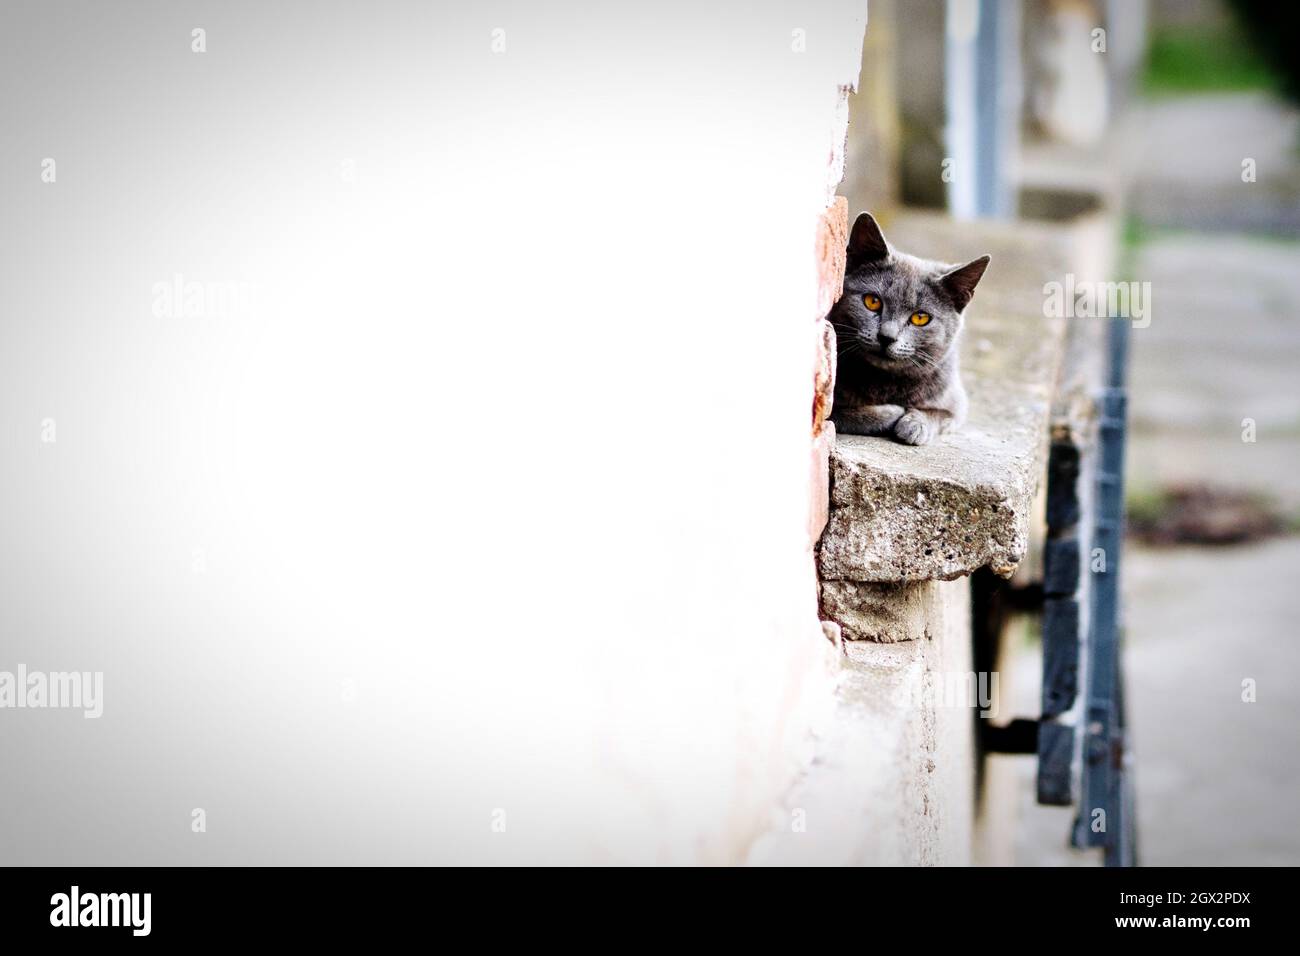 Portrait Of Cat Sitting On Wall Stock Photo